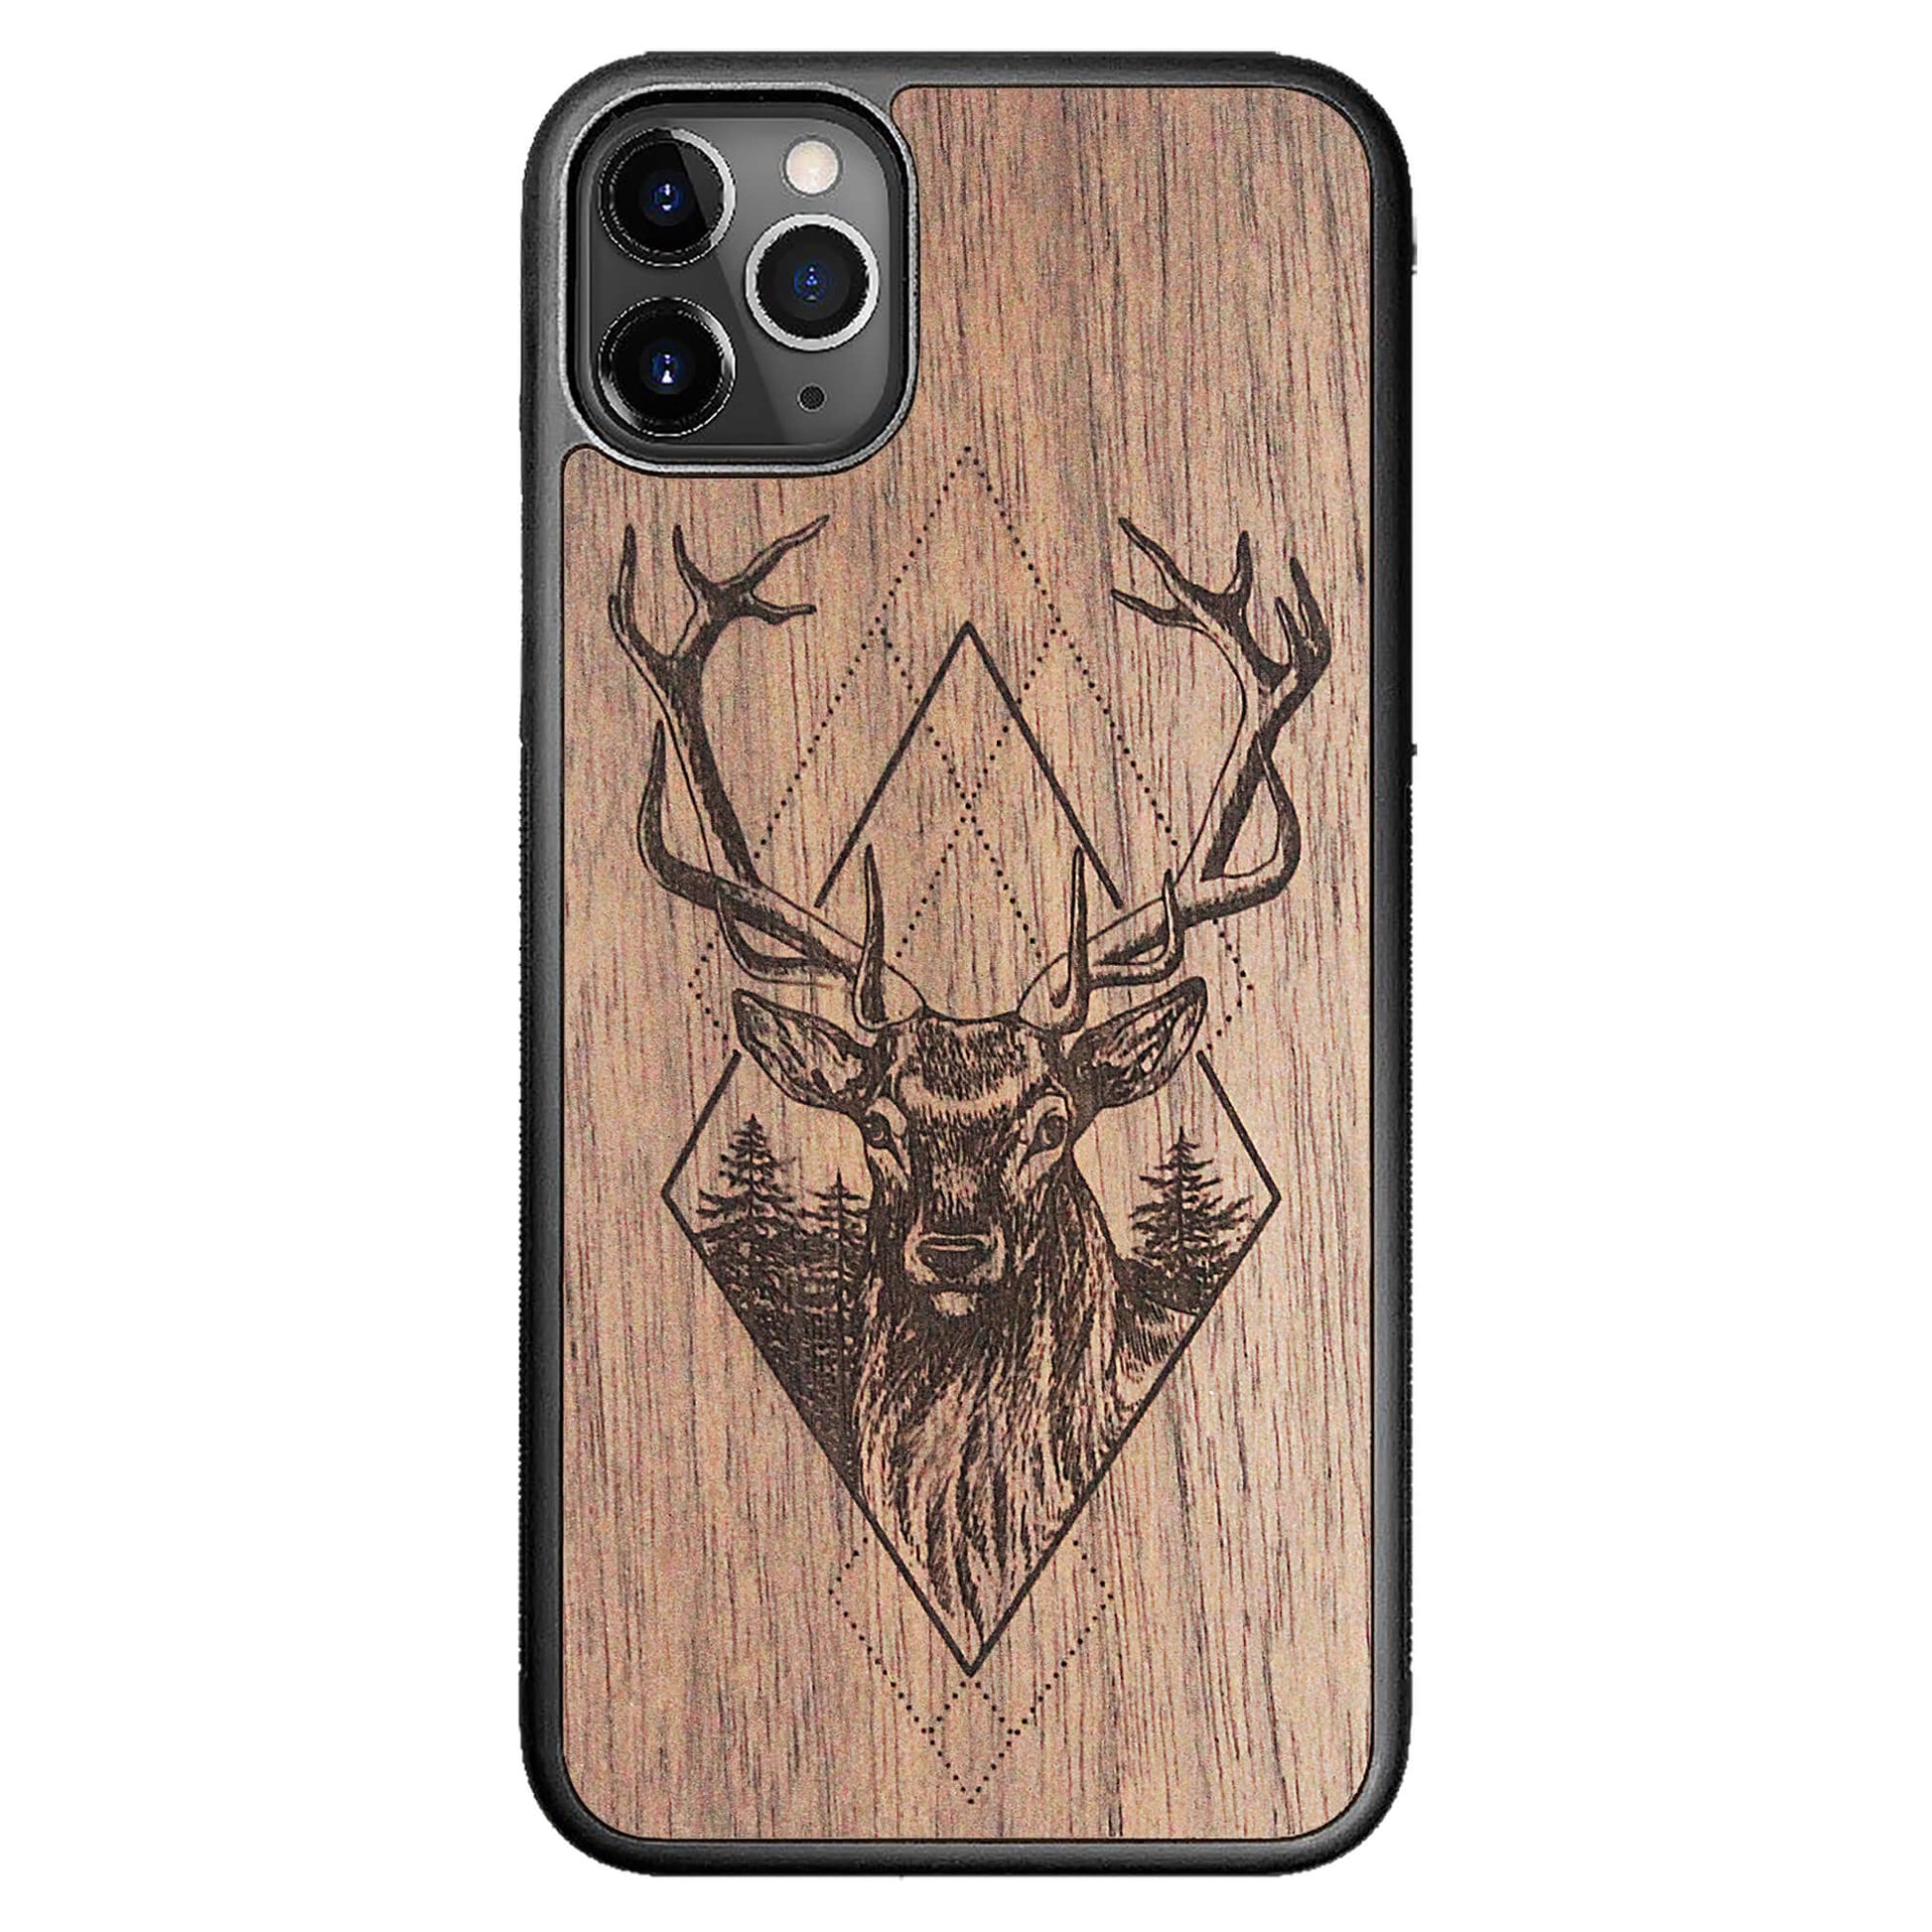 Wooden Case for iPhone 11 Pro Max Deer